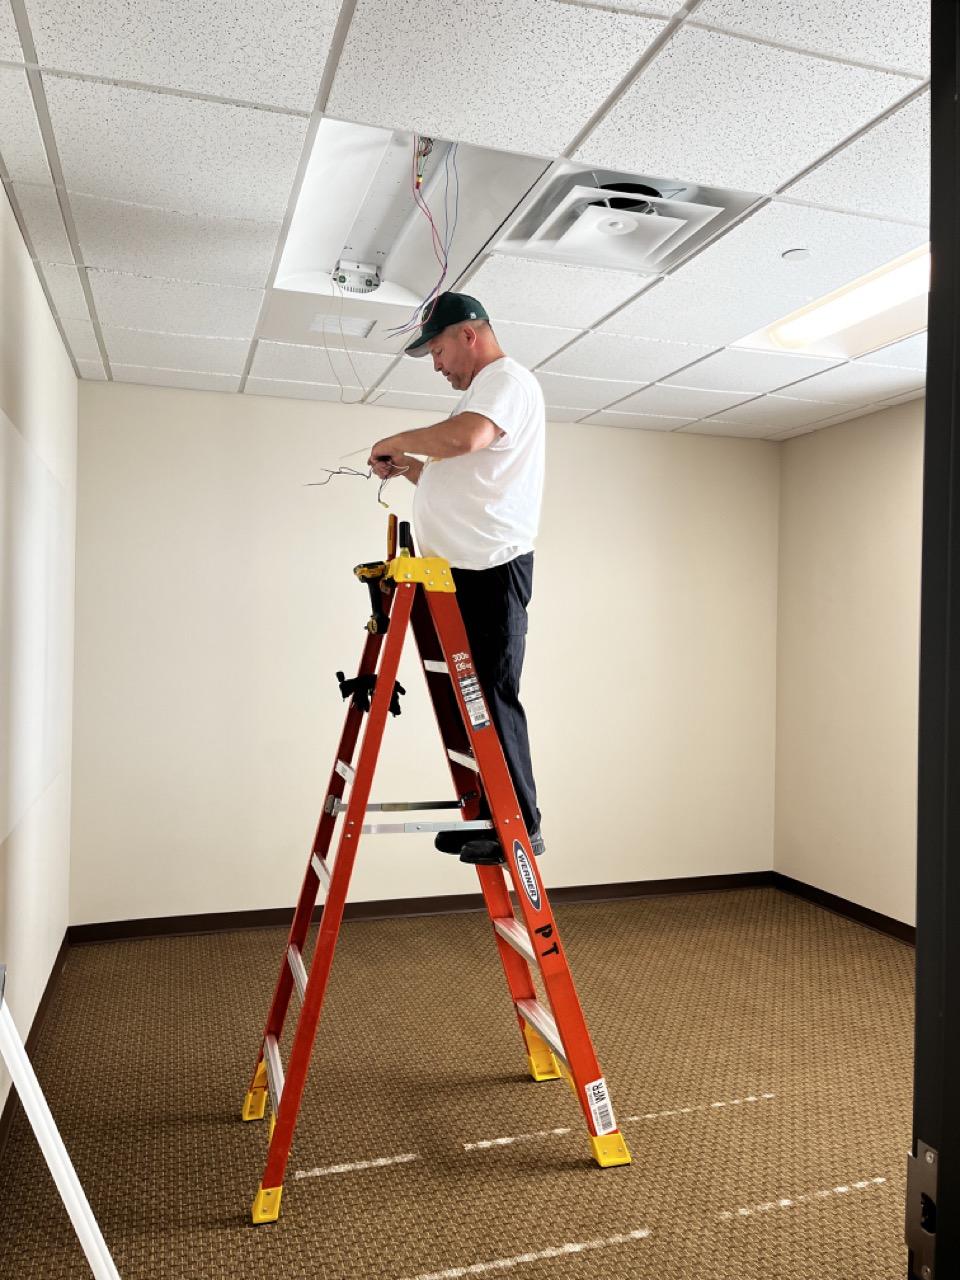 Bill Csaszar of the PT Maintenance team was tasked with installing efficient LED lighting throughout the new building